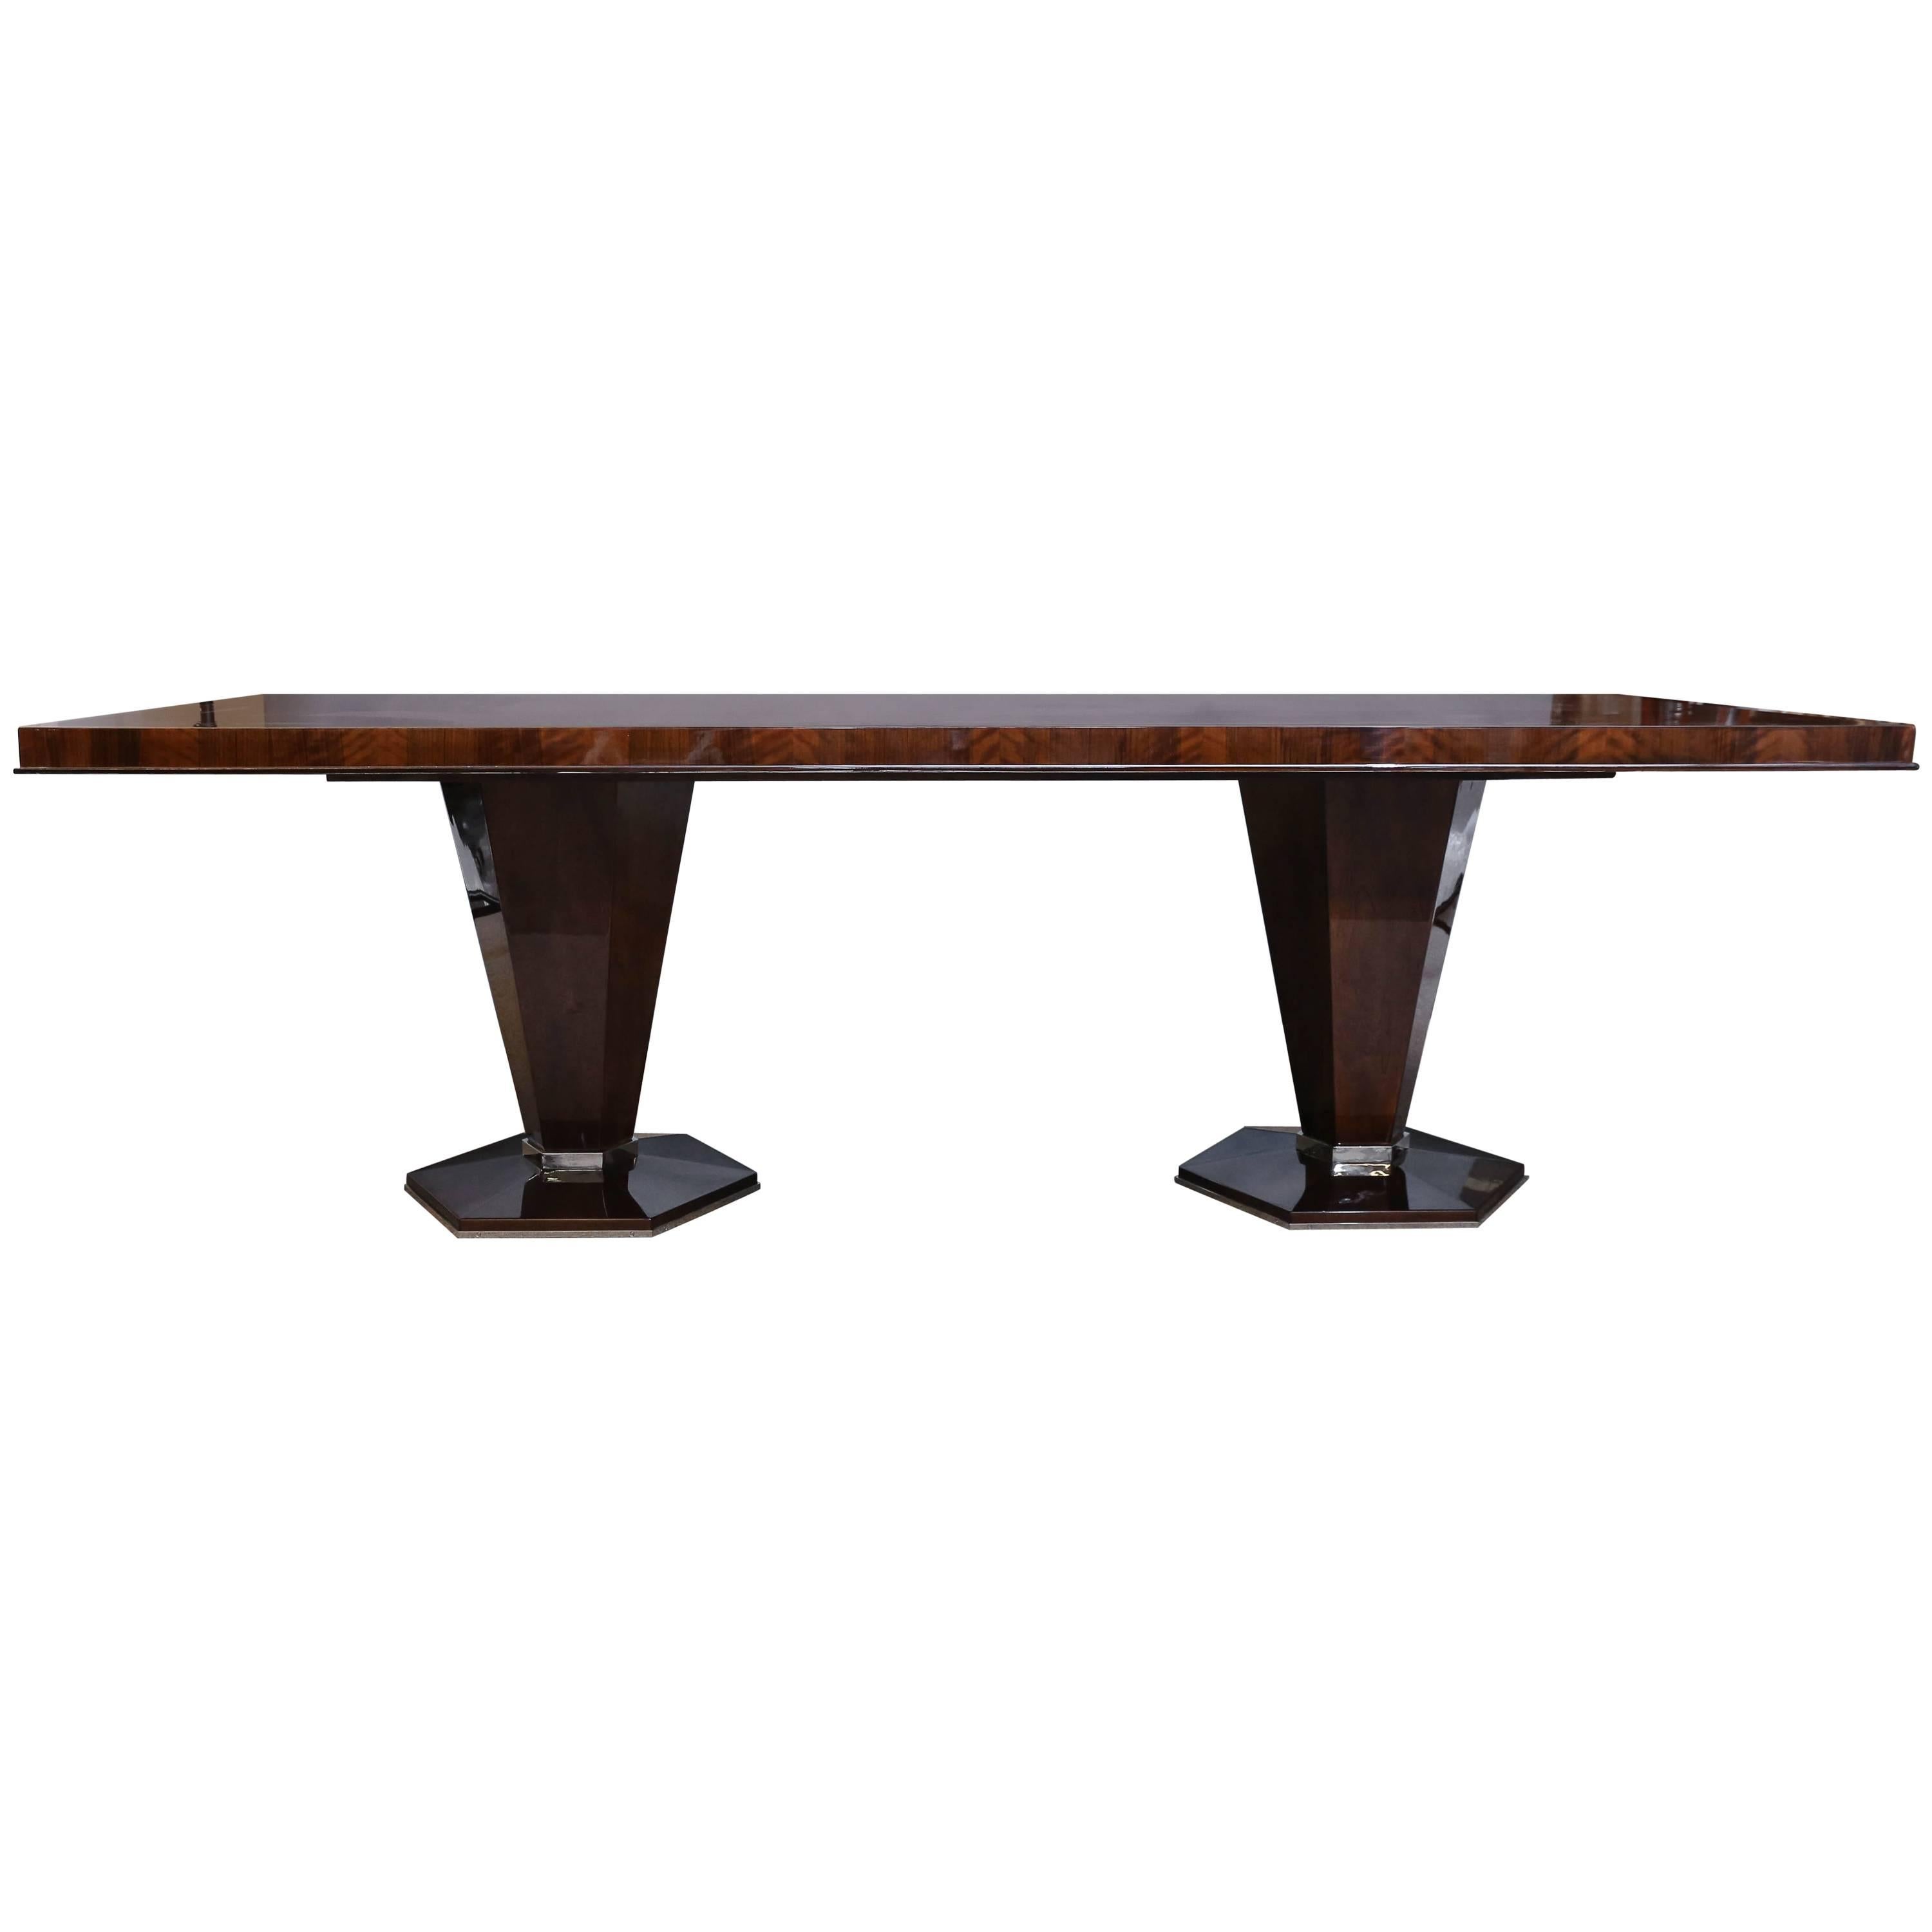 French Rectangular Art Deco Dinning Room Table in Walnut